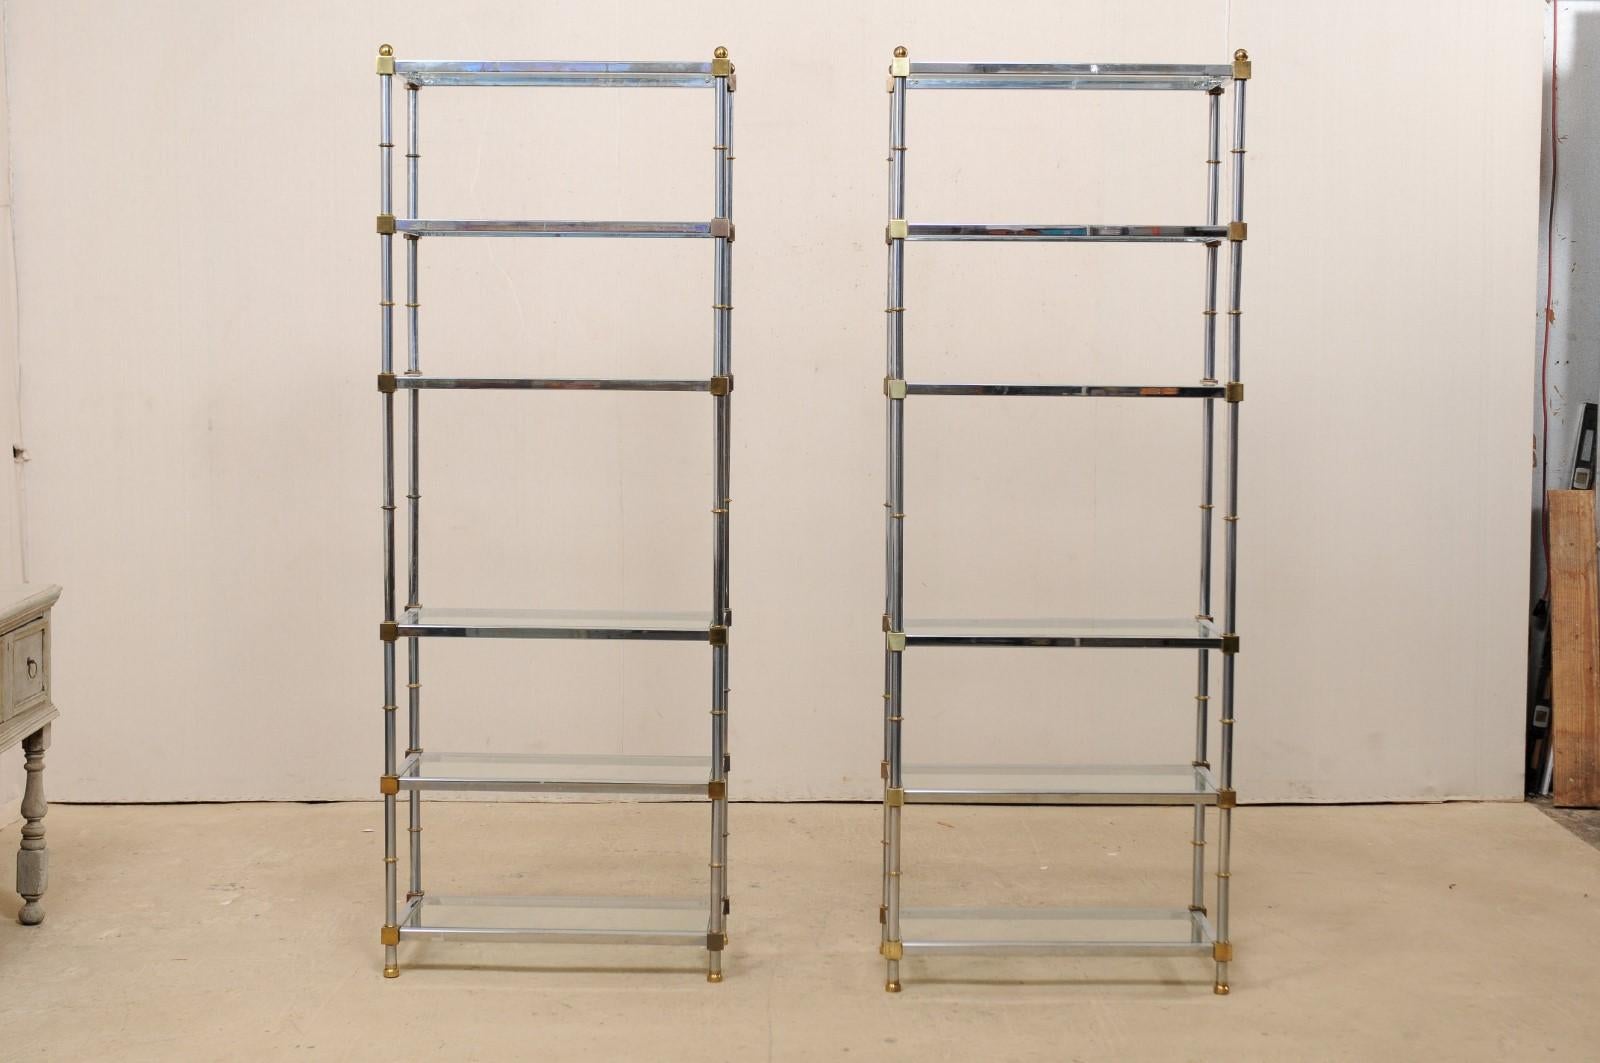 A pair of Hollywood Regency style open display chrome and glass shelves from the mid-20th century. This tall pair of midcentury American shelves have a wonderfully sleek design, reminiscent of Maison Jansen style. These modern designed bookshelves